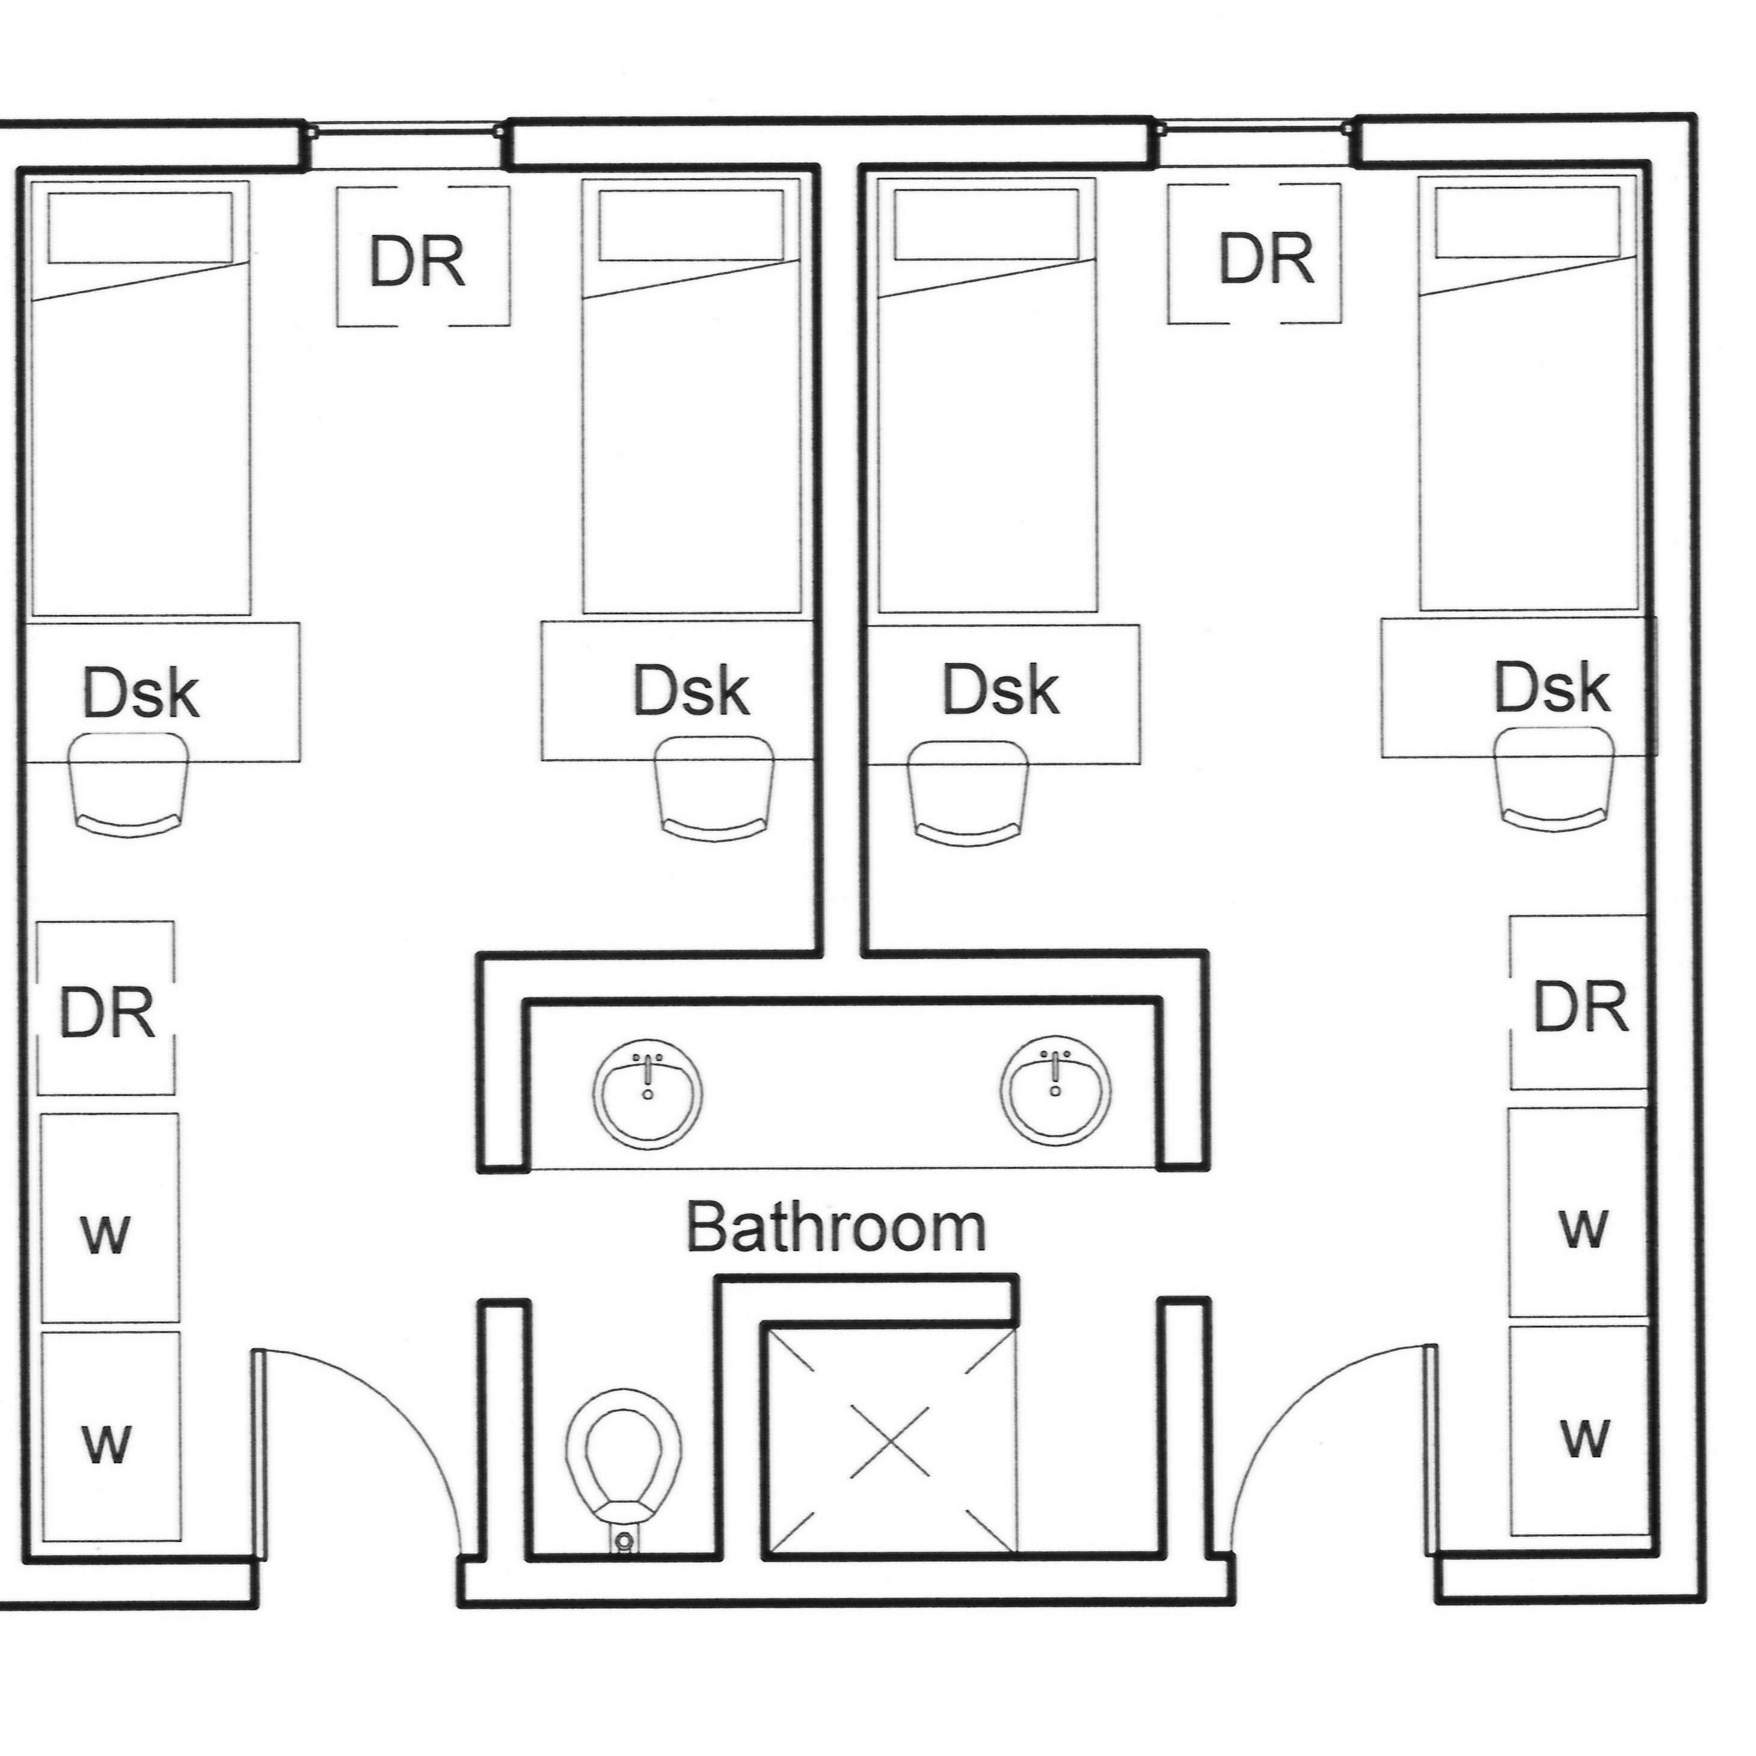 Tower Hall double bedroom suite layout